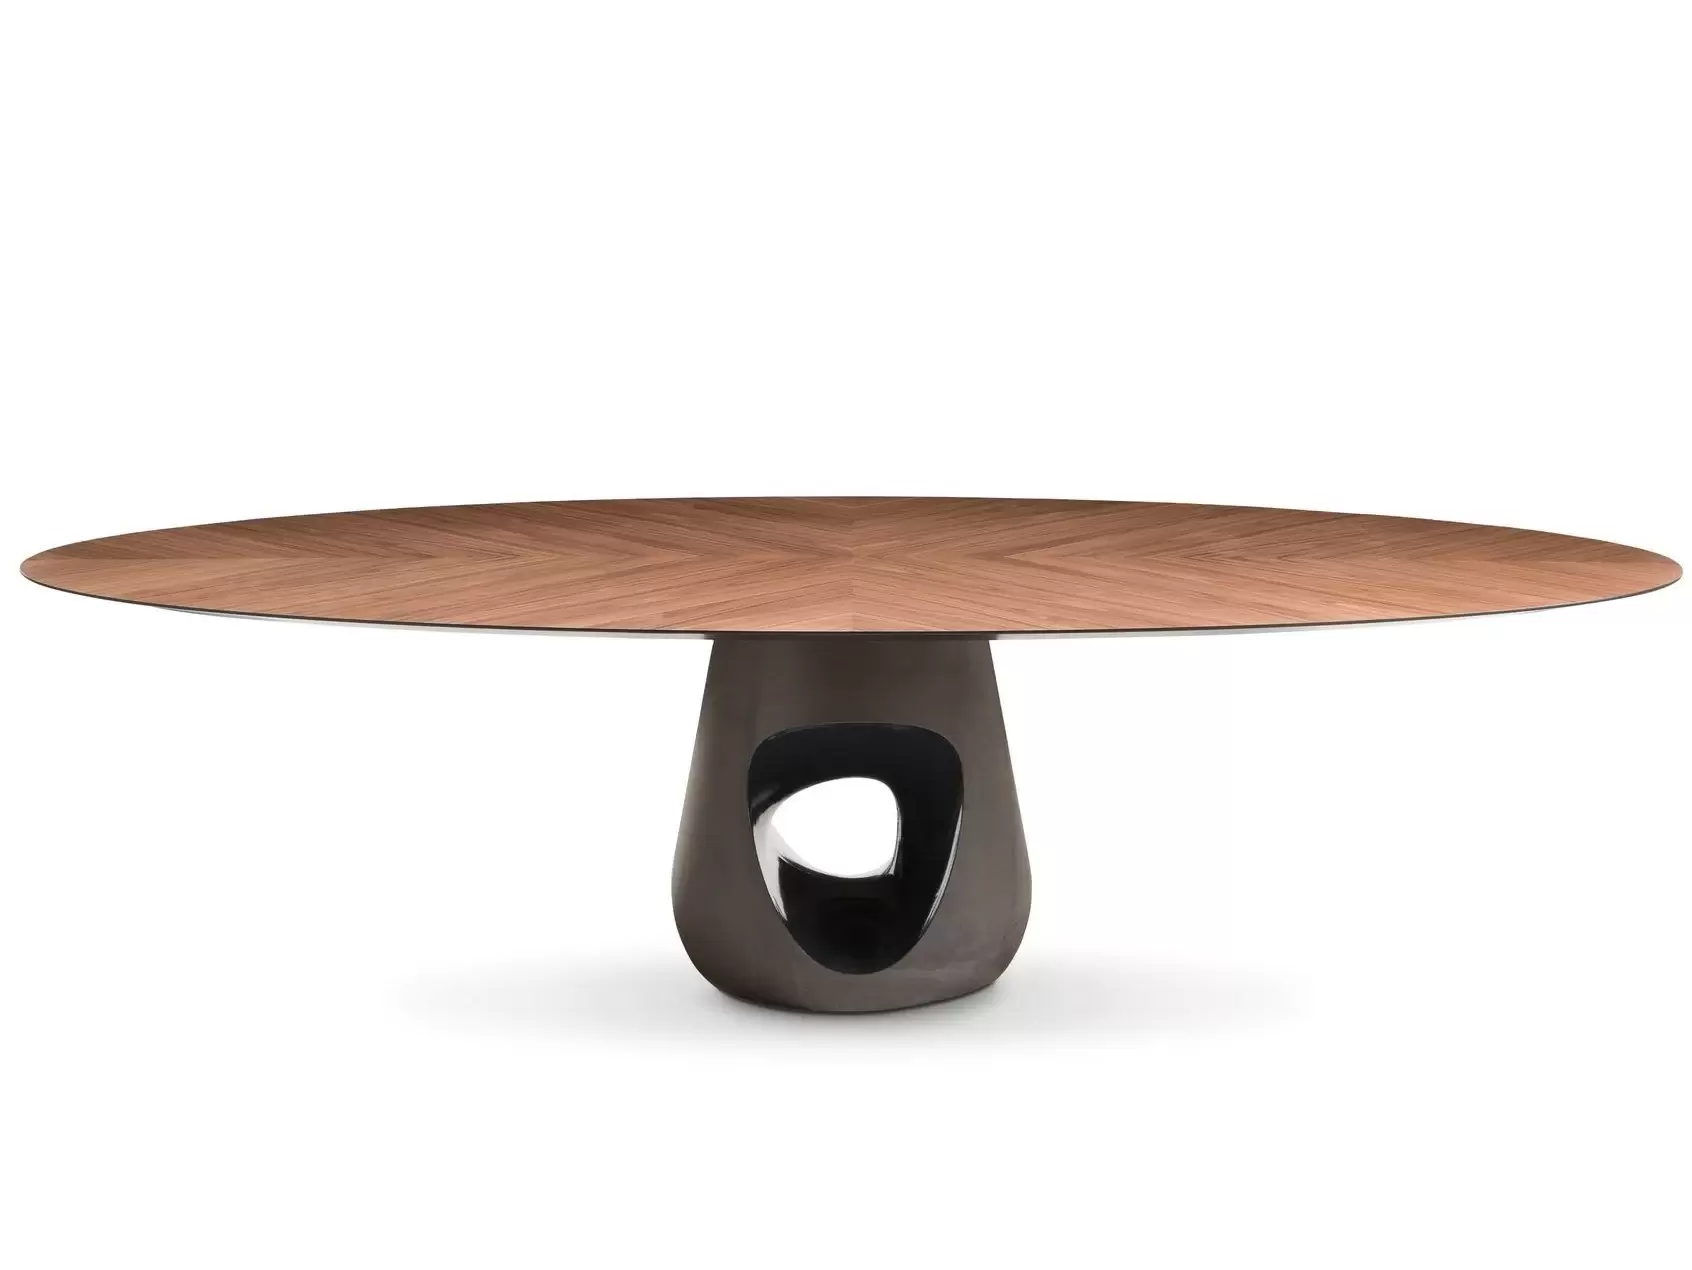 BARBARA OVAL WOODEN TABLE